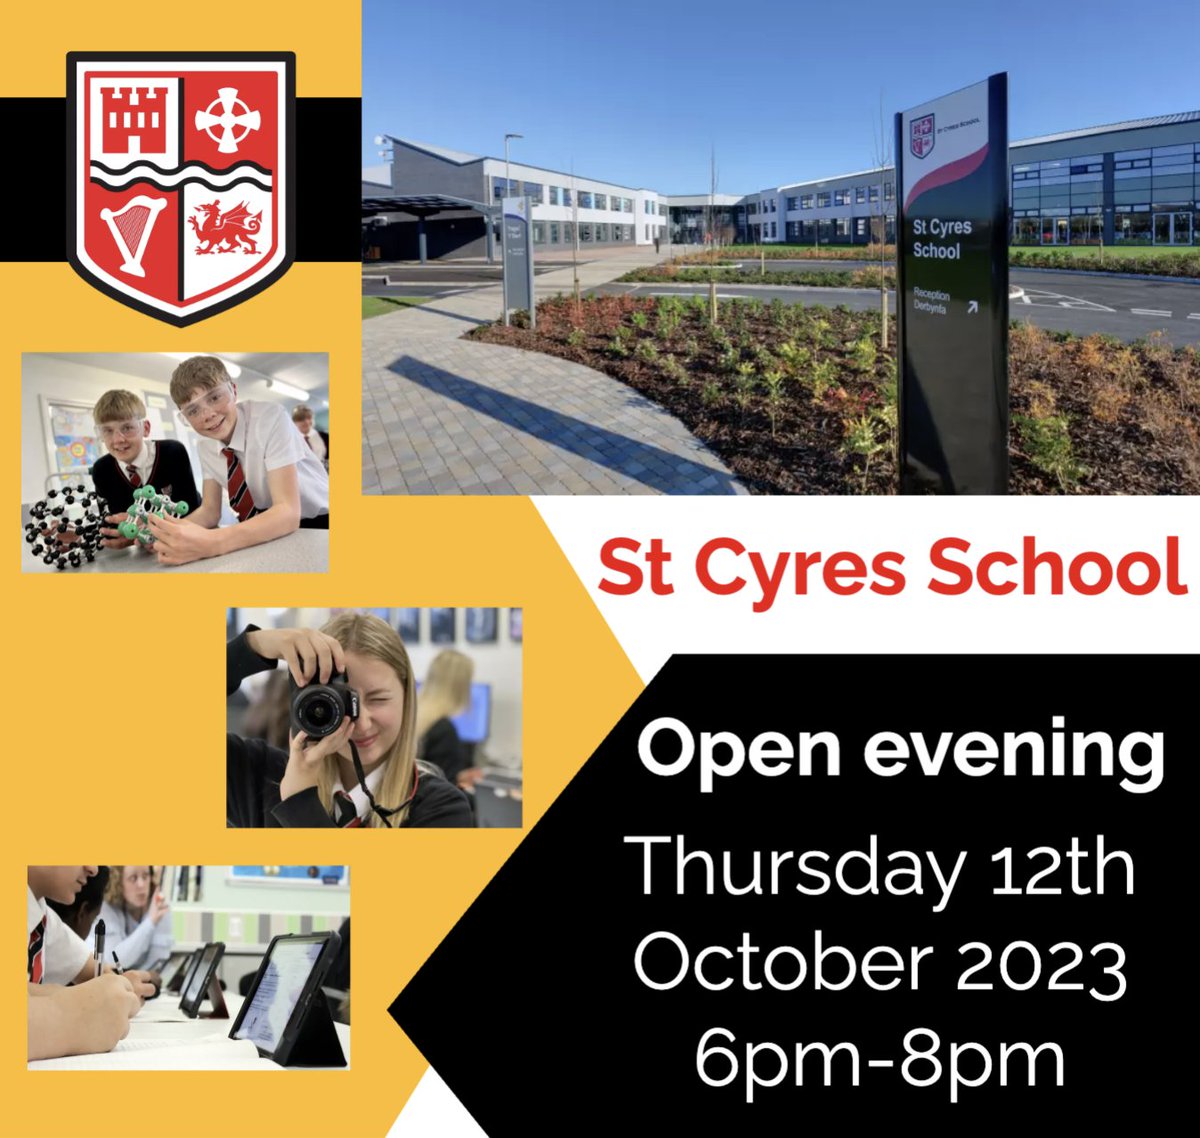 We would like to invite you all to our Open Evening, please share @stpaulsprm @StPatsCardiff @npps @Holtonprimary @AlbertPrimary @evenlodeps @VictoriaPenarth @gladstonebarry @JennerPark @YsgolPenyGarth @stjpenarth @sthcpsbarry @StCyresSchool @CyresTransition